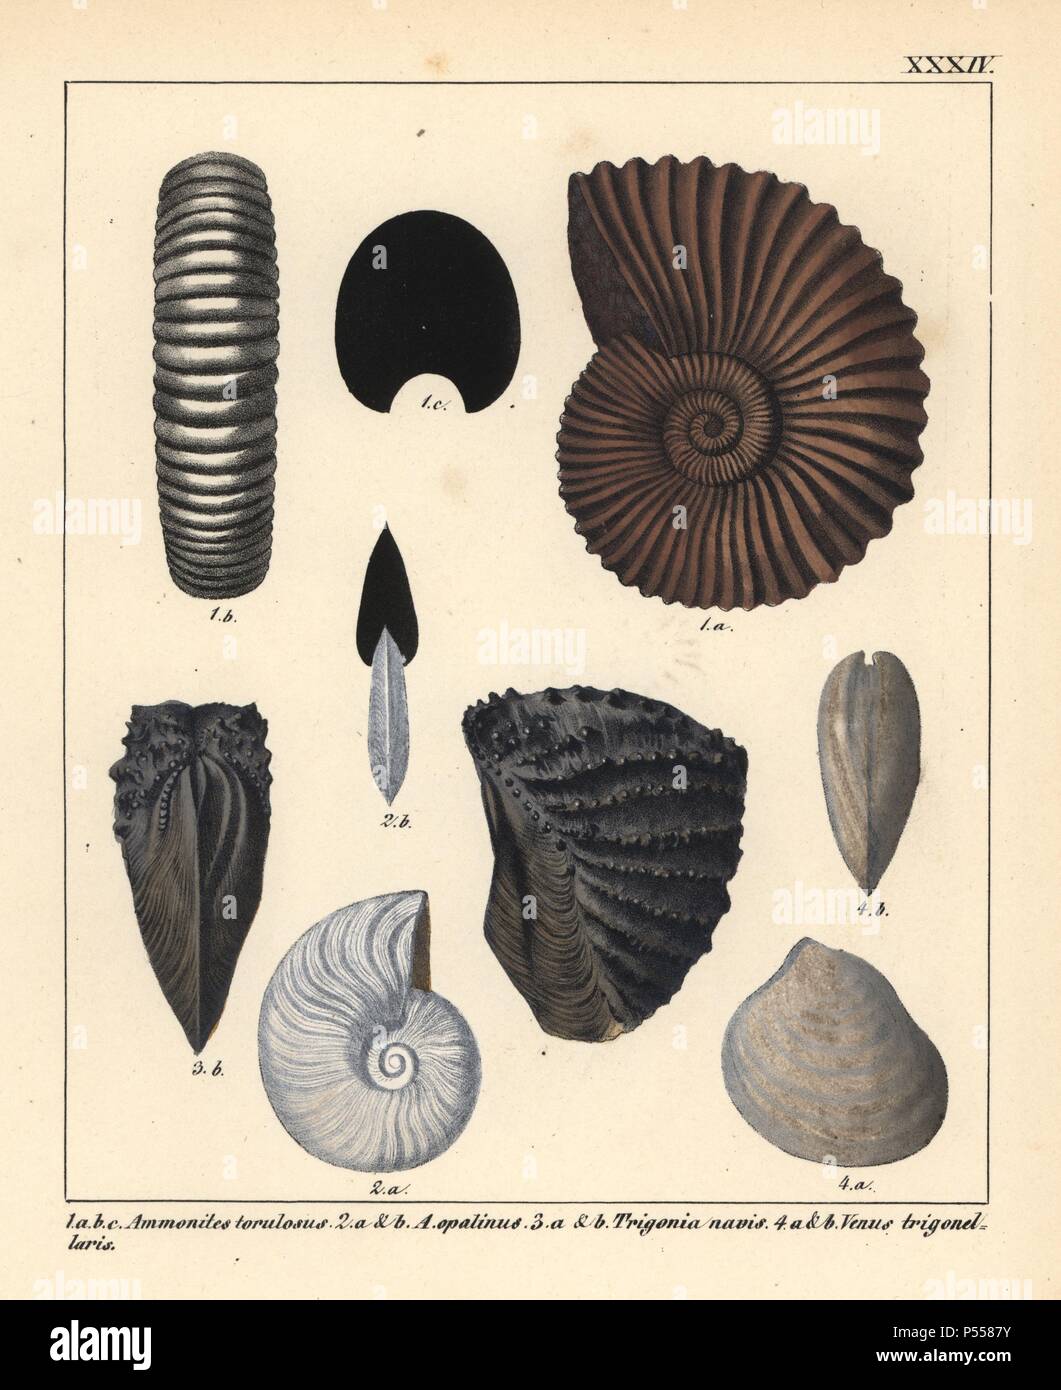 Extinct fossil gastropods: Ammonites torulosus, A. opalinus, Trigonia navis and Venus trigonellaris. Handcoloured lithograph by an unknown artist from Dr. F.A. Schmidt's 'Petrefactenbuch,' published in Stuttgart, Germany, 1855 by Verlag von Krais & Hoffmann. Dr. Schmidt's 'Book of Petrification' introduced fossils and palaeontology to both the specialist and general reader. Stock Photo